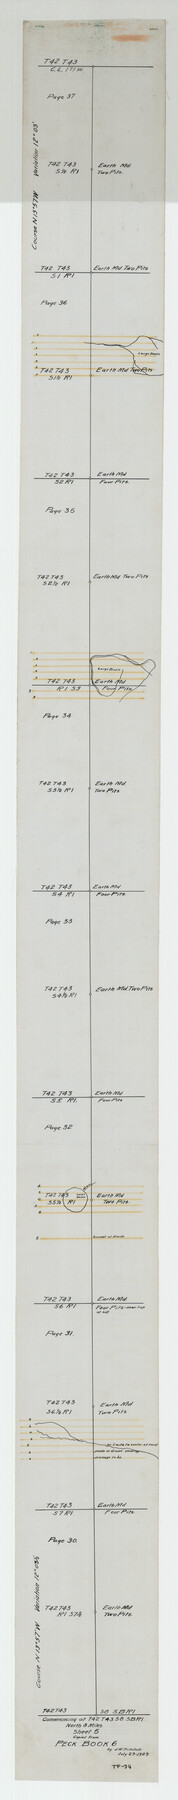 93171, Sheet 5 copied from Peck Book 6 [Strip Map showing T. & P. connecting lines], Twichell Survey Records